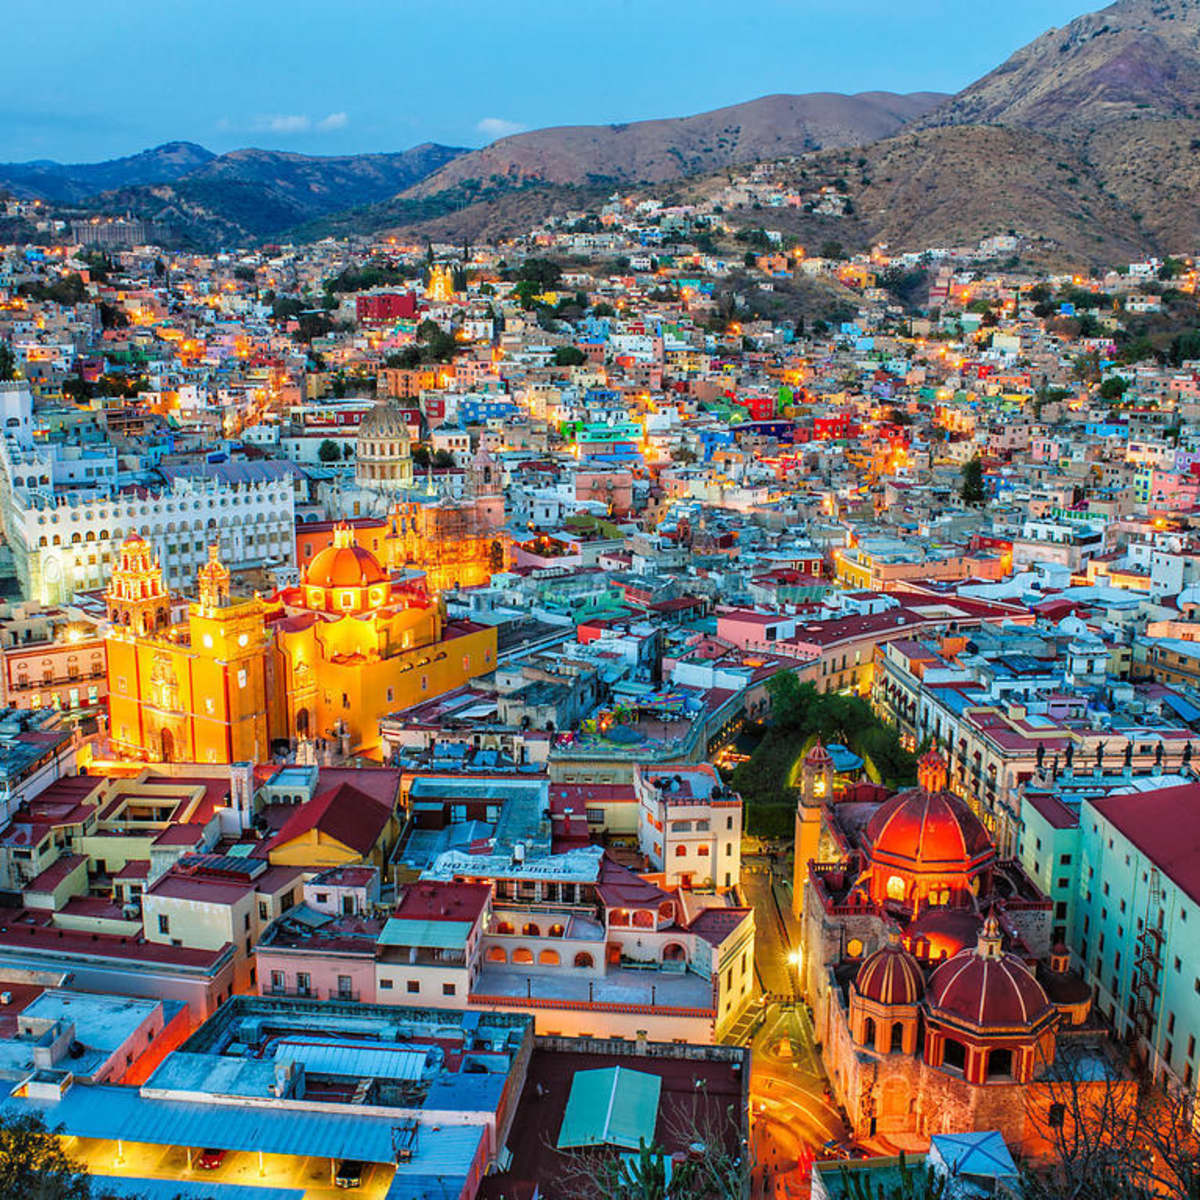 All the world's a stage”: Creating Guanajuato, Mexico's Tourism Image